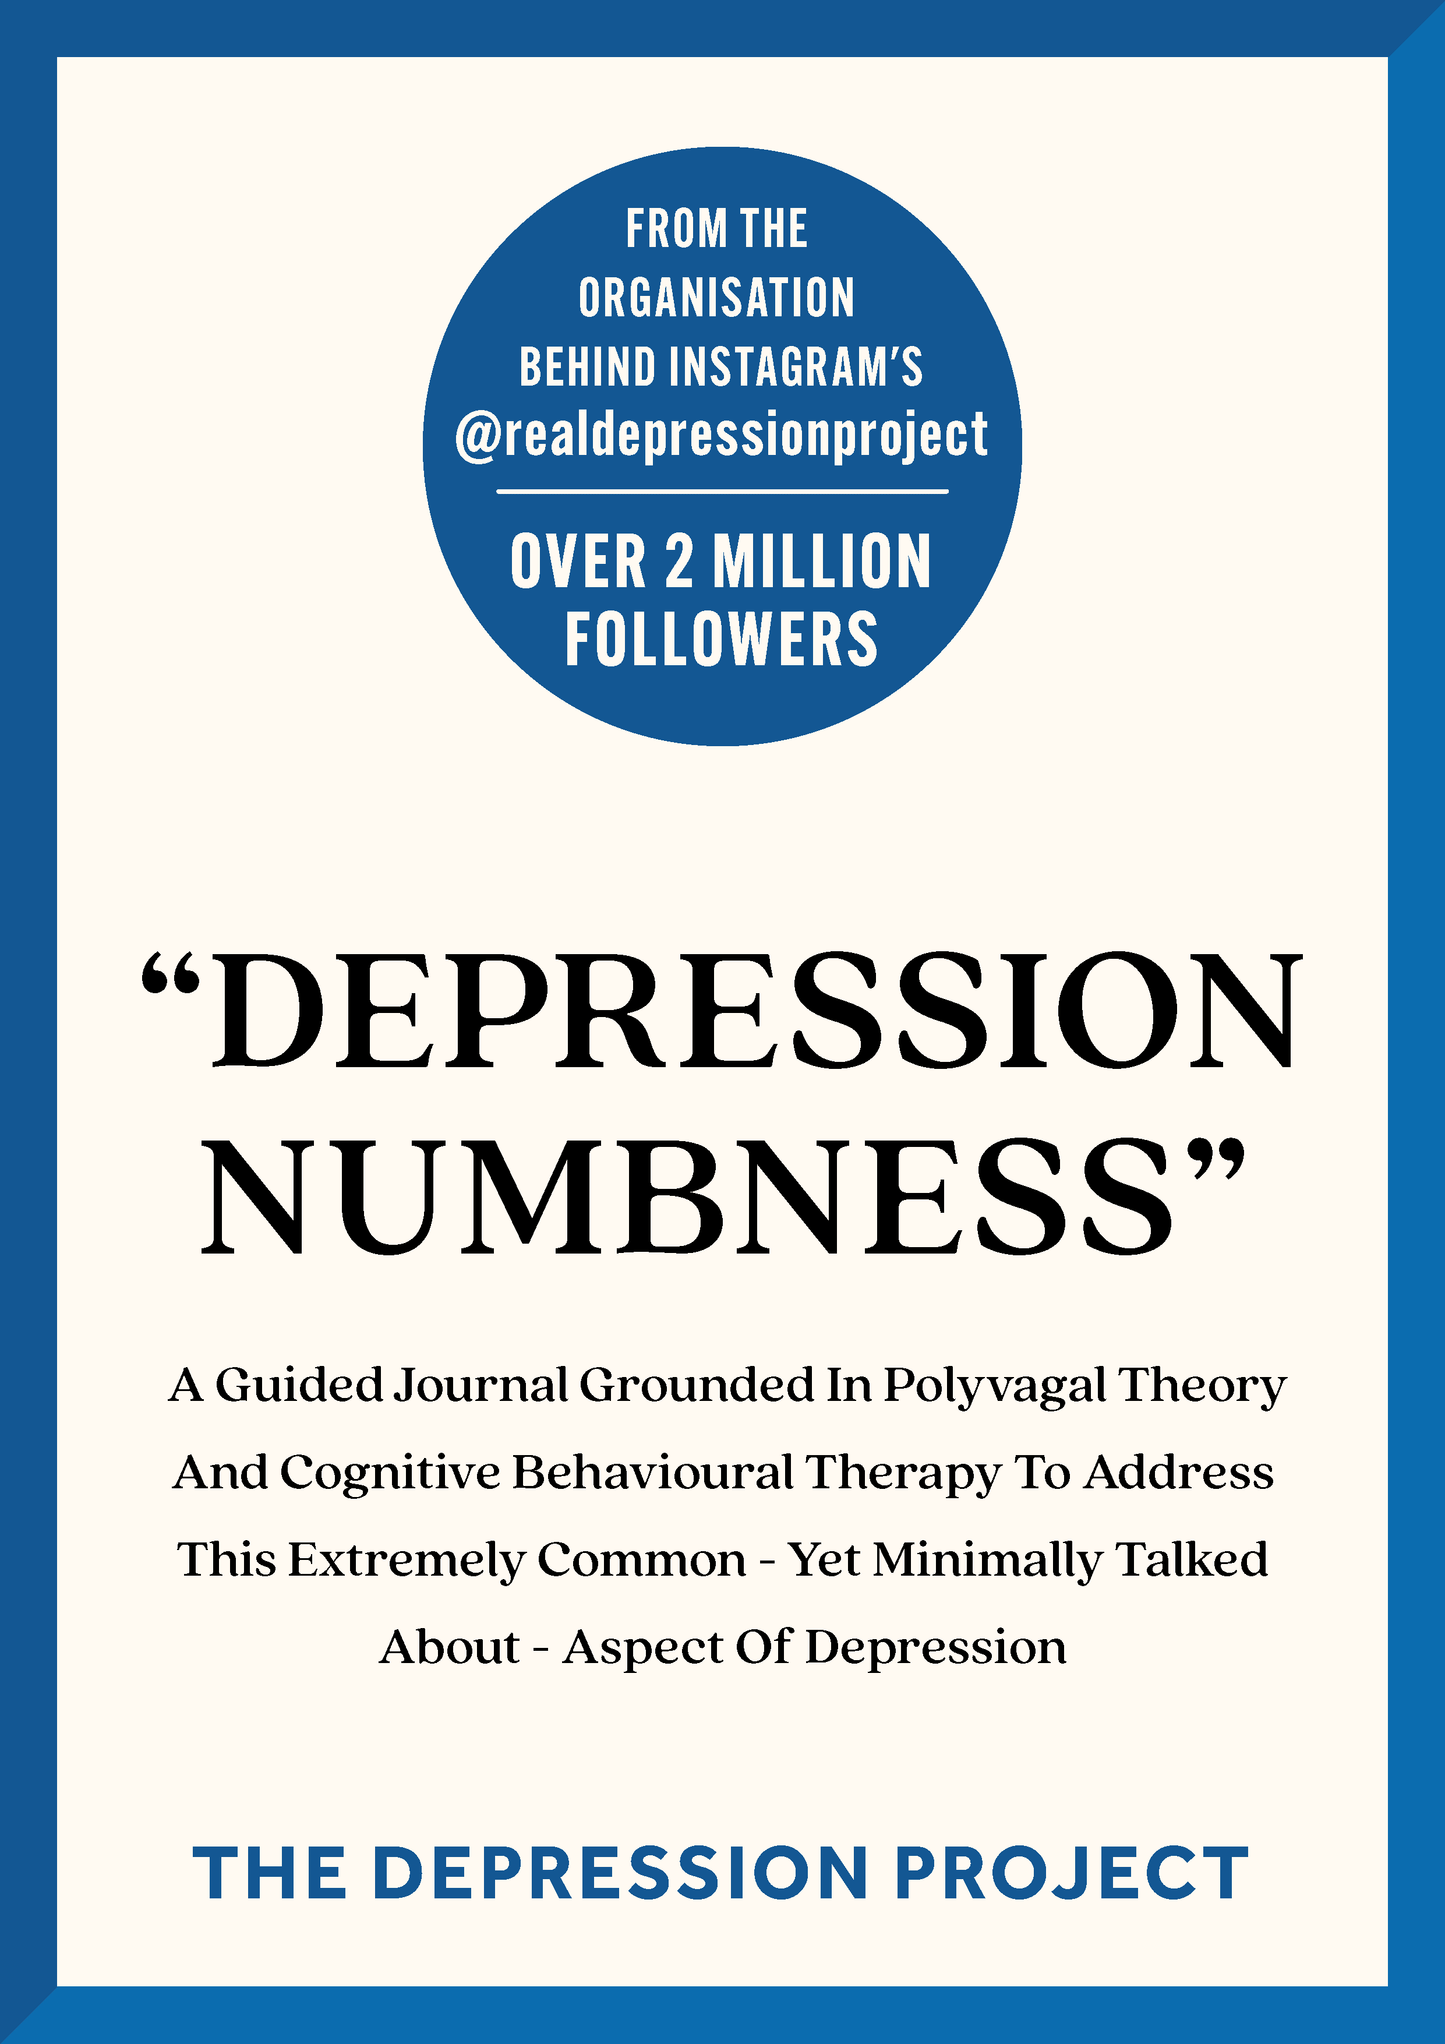 The "Depression Numbness" Journal - The Depression Project